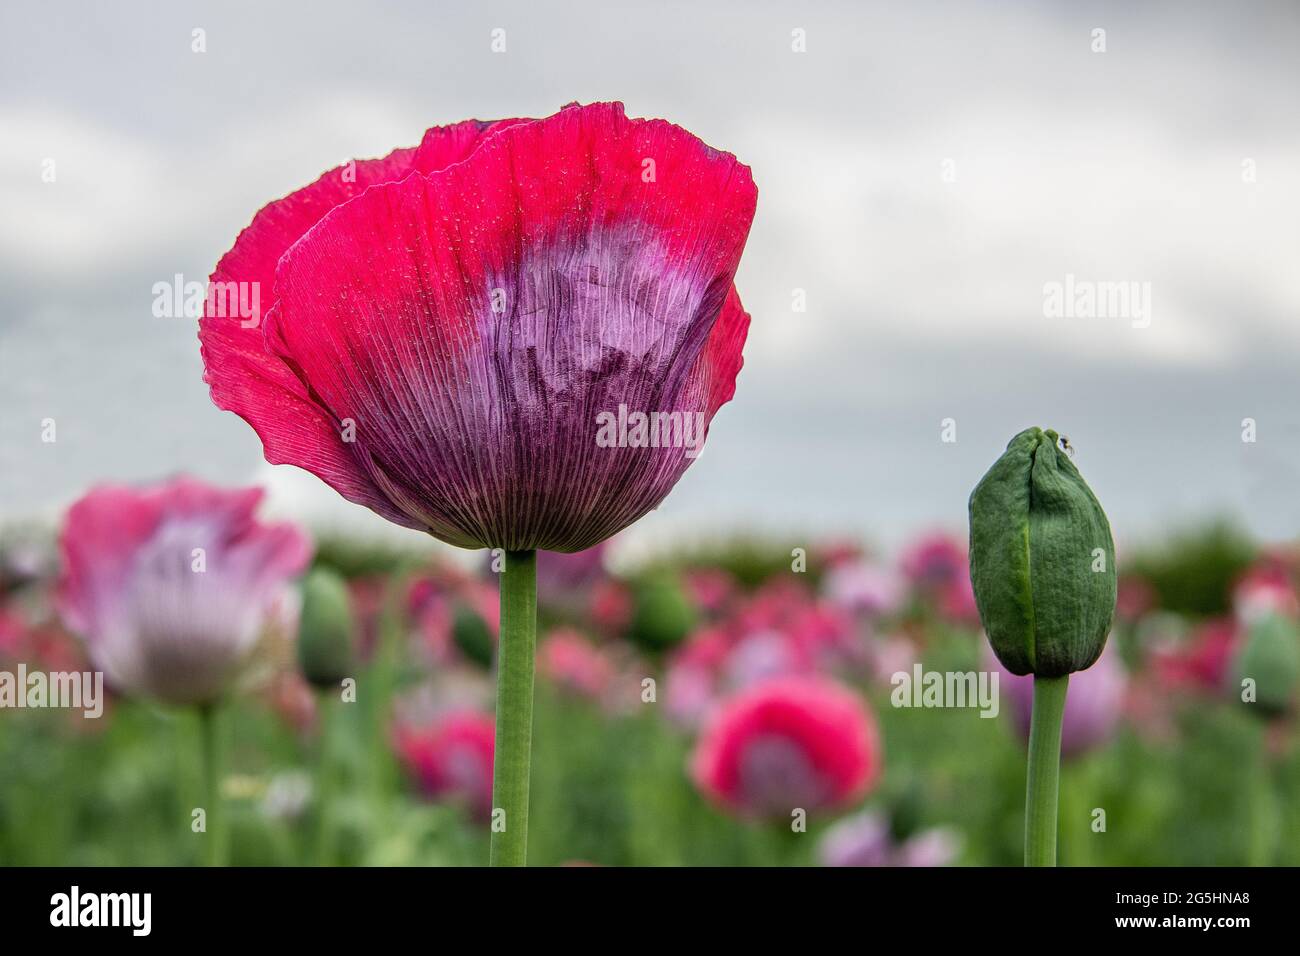 a view looking up at an opium poppy in flower and a new bud next to it yet to flower. In the background is the out of focus poppy field Stock Photo